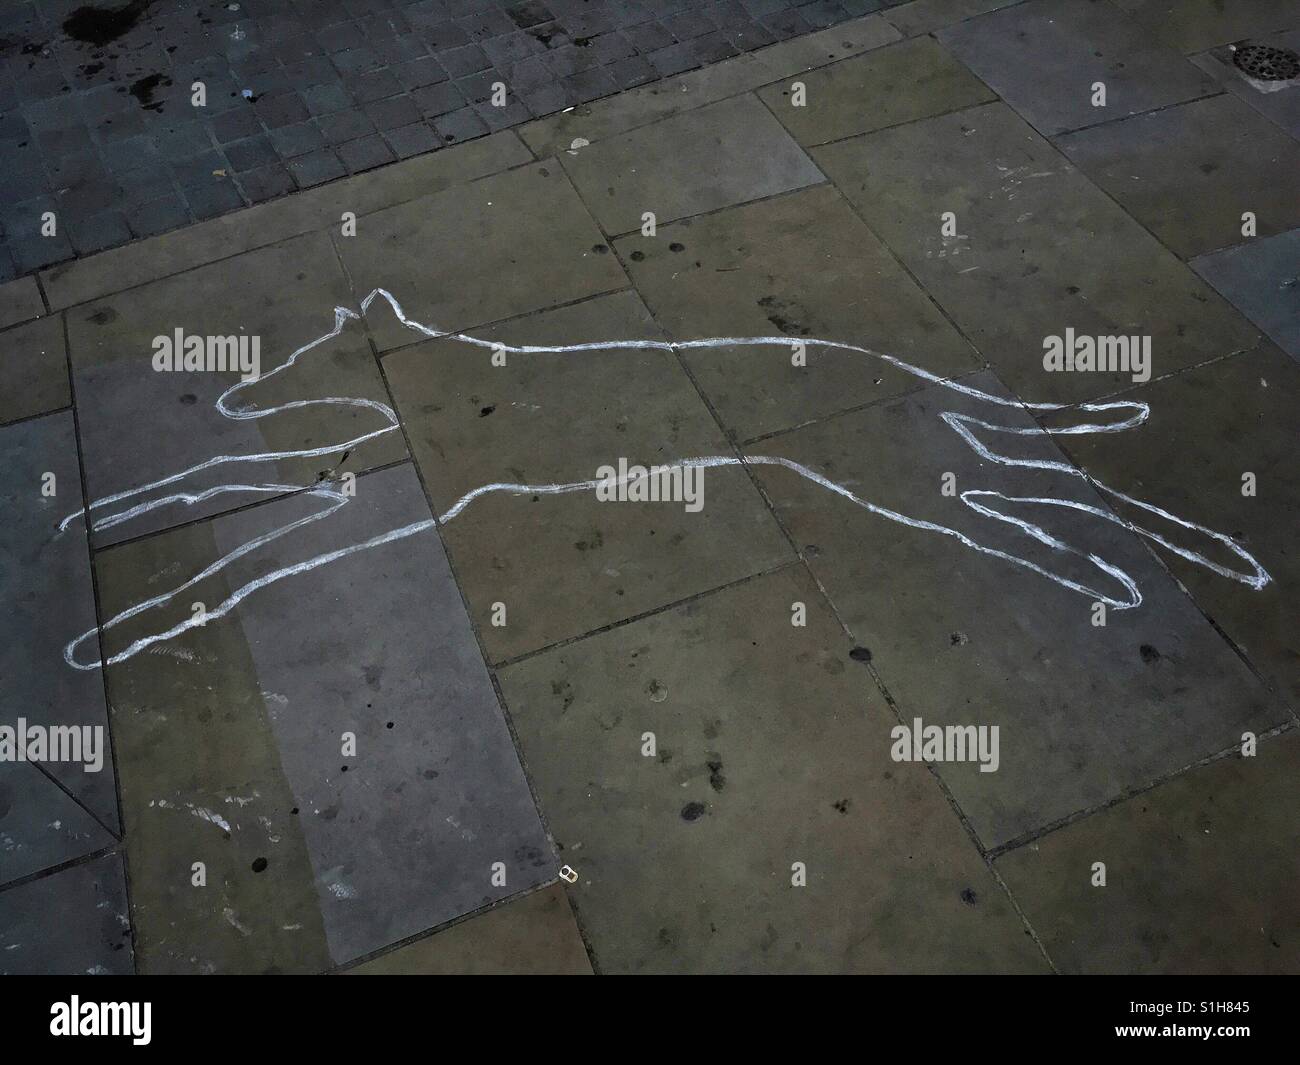 The outline of a dog in white paint on a pavement advertises a stage production of Mark Haddon's novel 'The Curious Incident of the Dog in the Night-Time' at the Hippodrome theatre in Bristol, UK Stock Photo